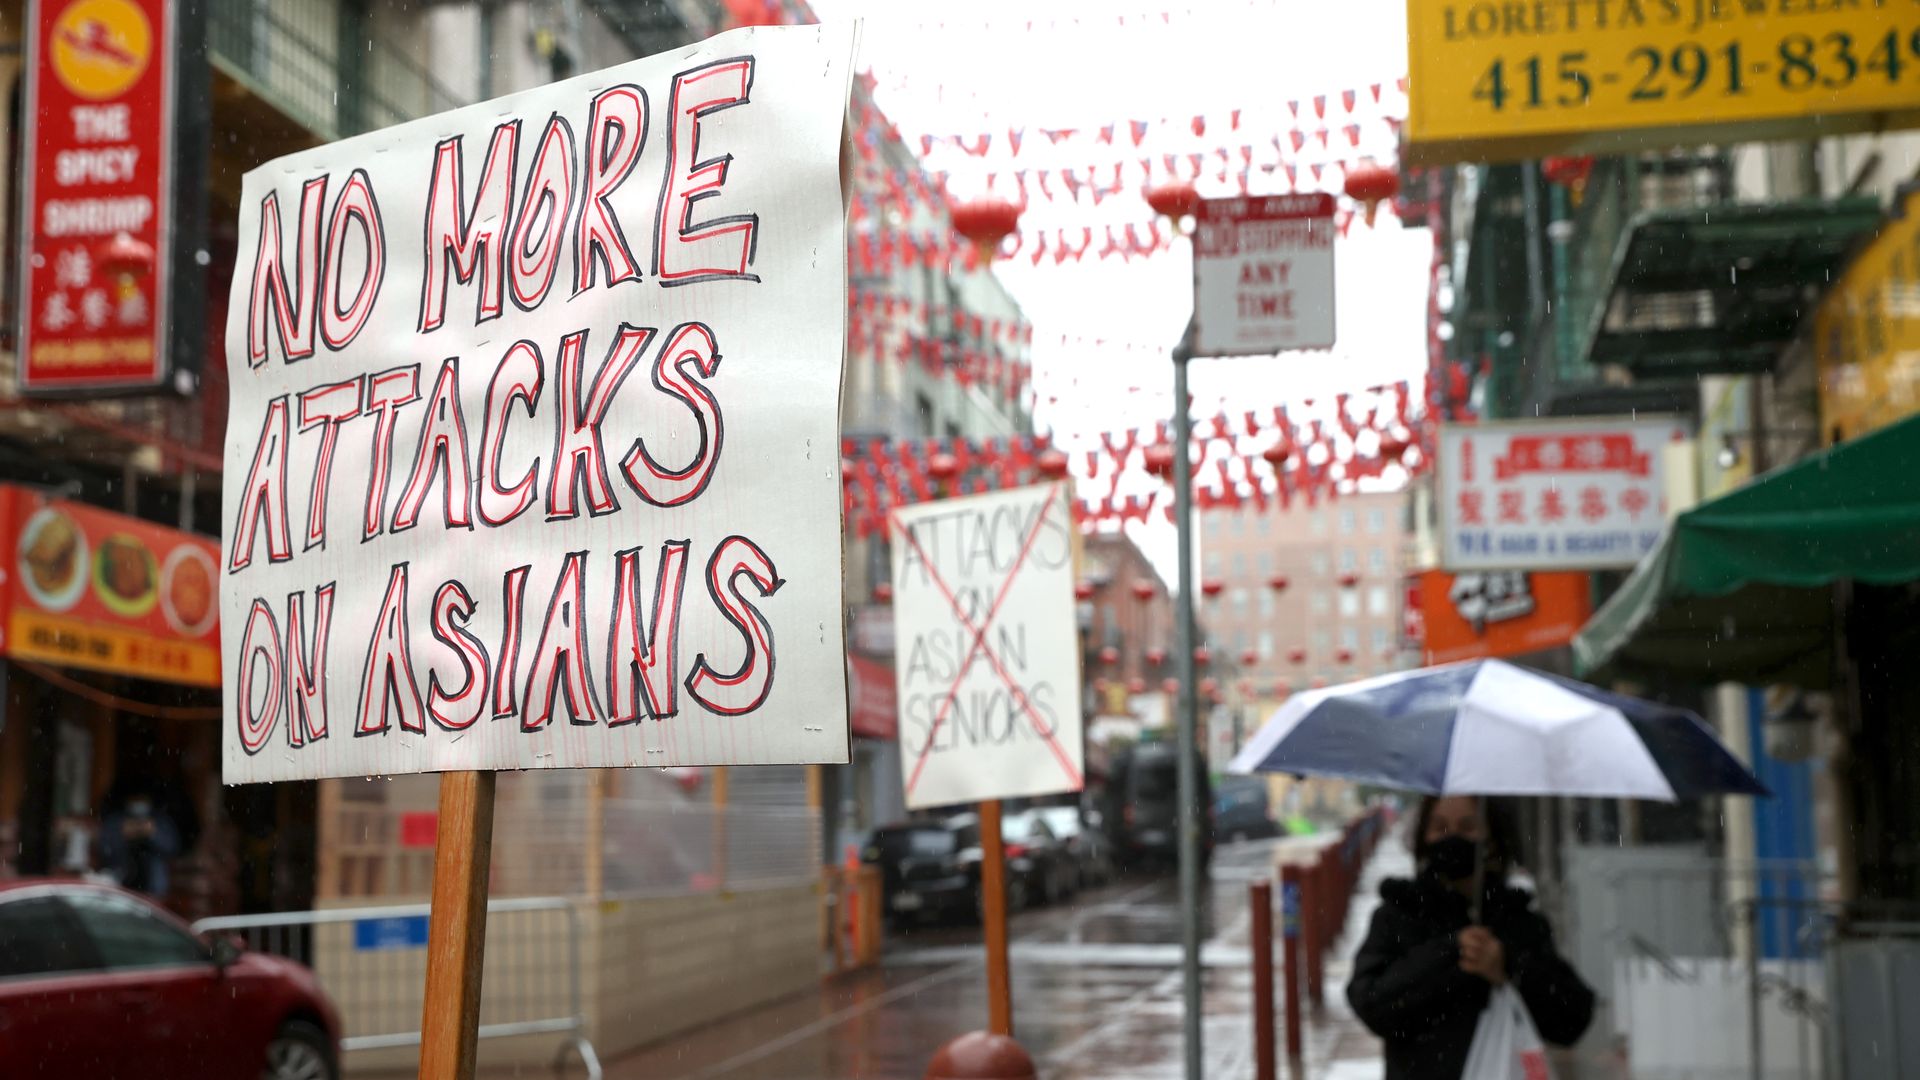 Photo of a sign that says "No more attacks on Asians" standing in a SF Chinatown street decorated with red lanterns